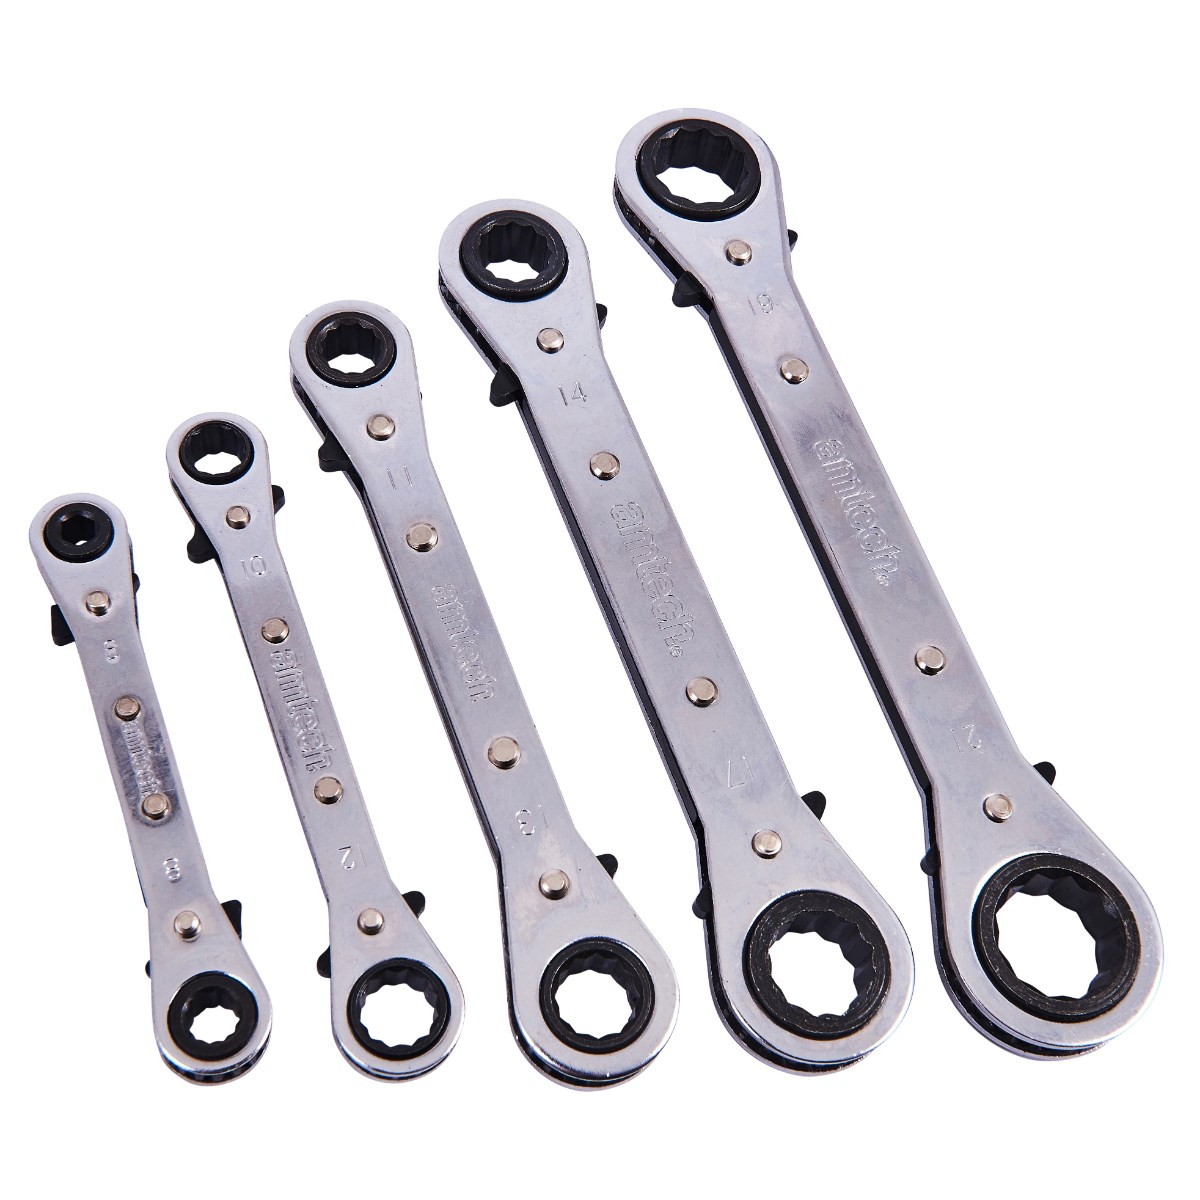 HEAVY DUTY 5PC AF IMPERIAL REVERSIBLE RATCHET RING SPANNER WRENCH SET NEW 